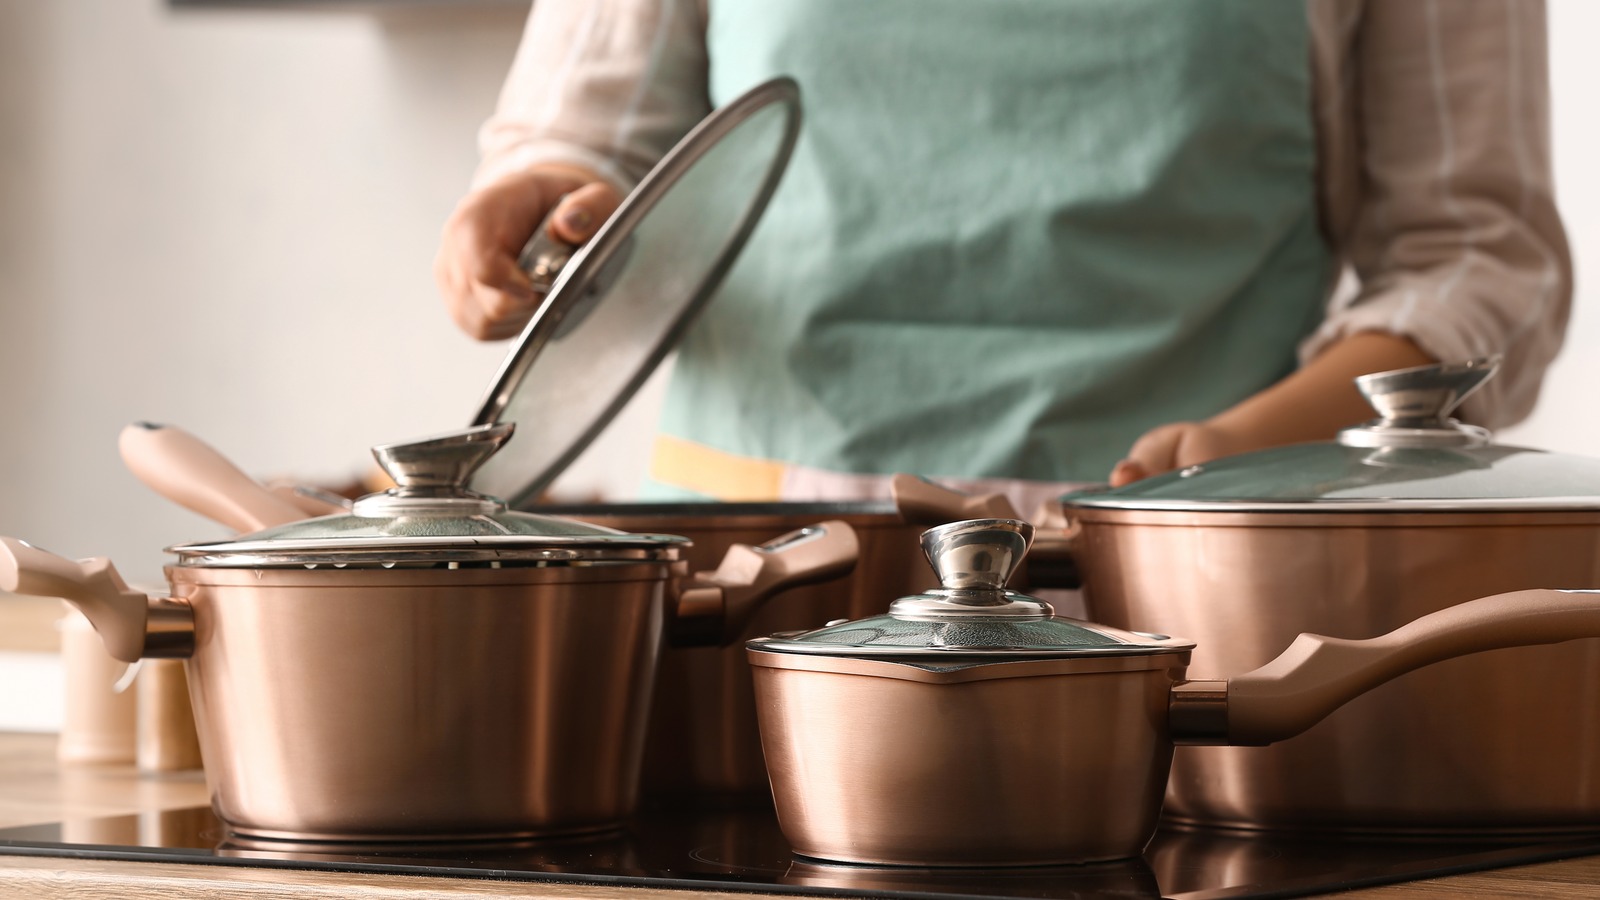 Saucepan vs. Pot: What's the Difference?